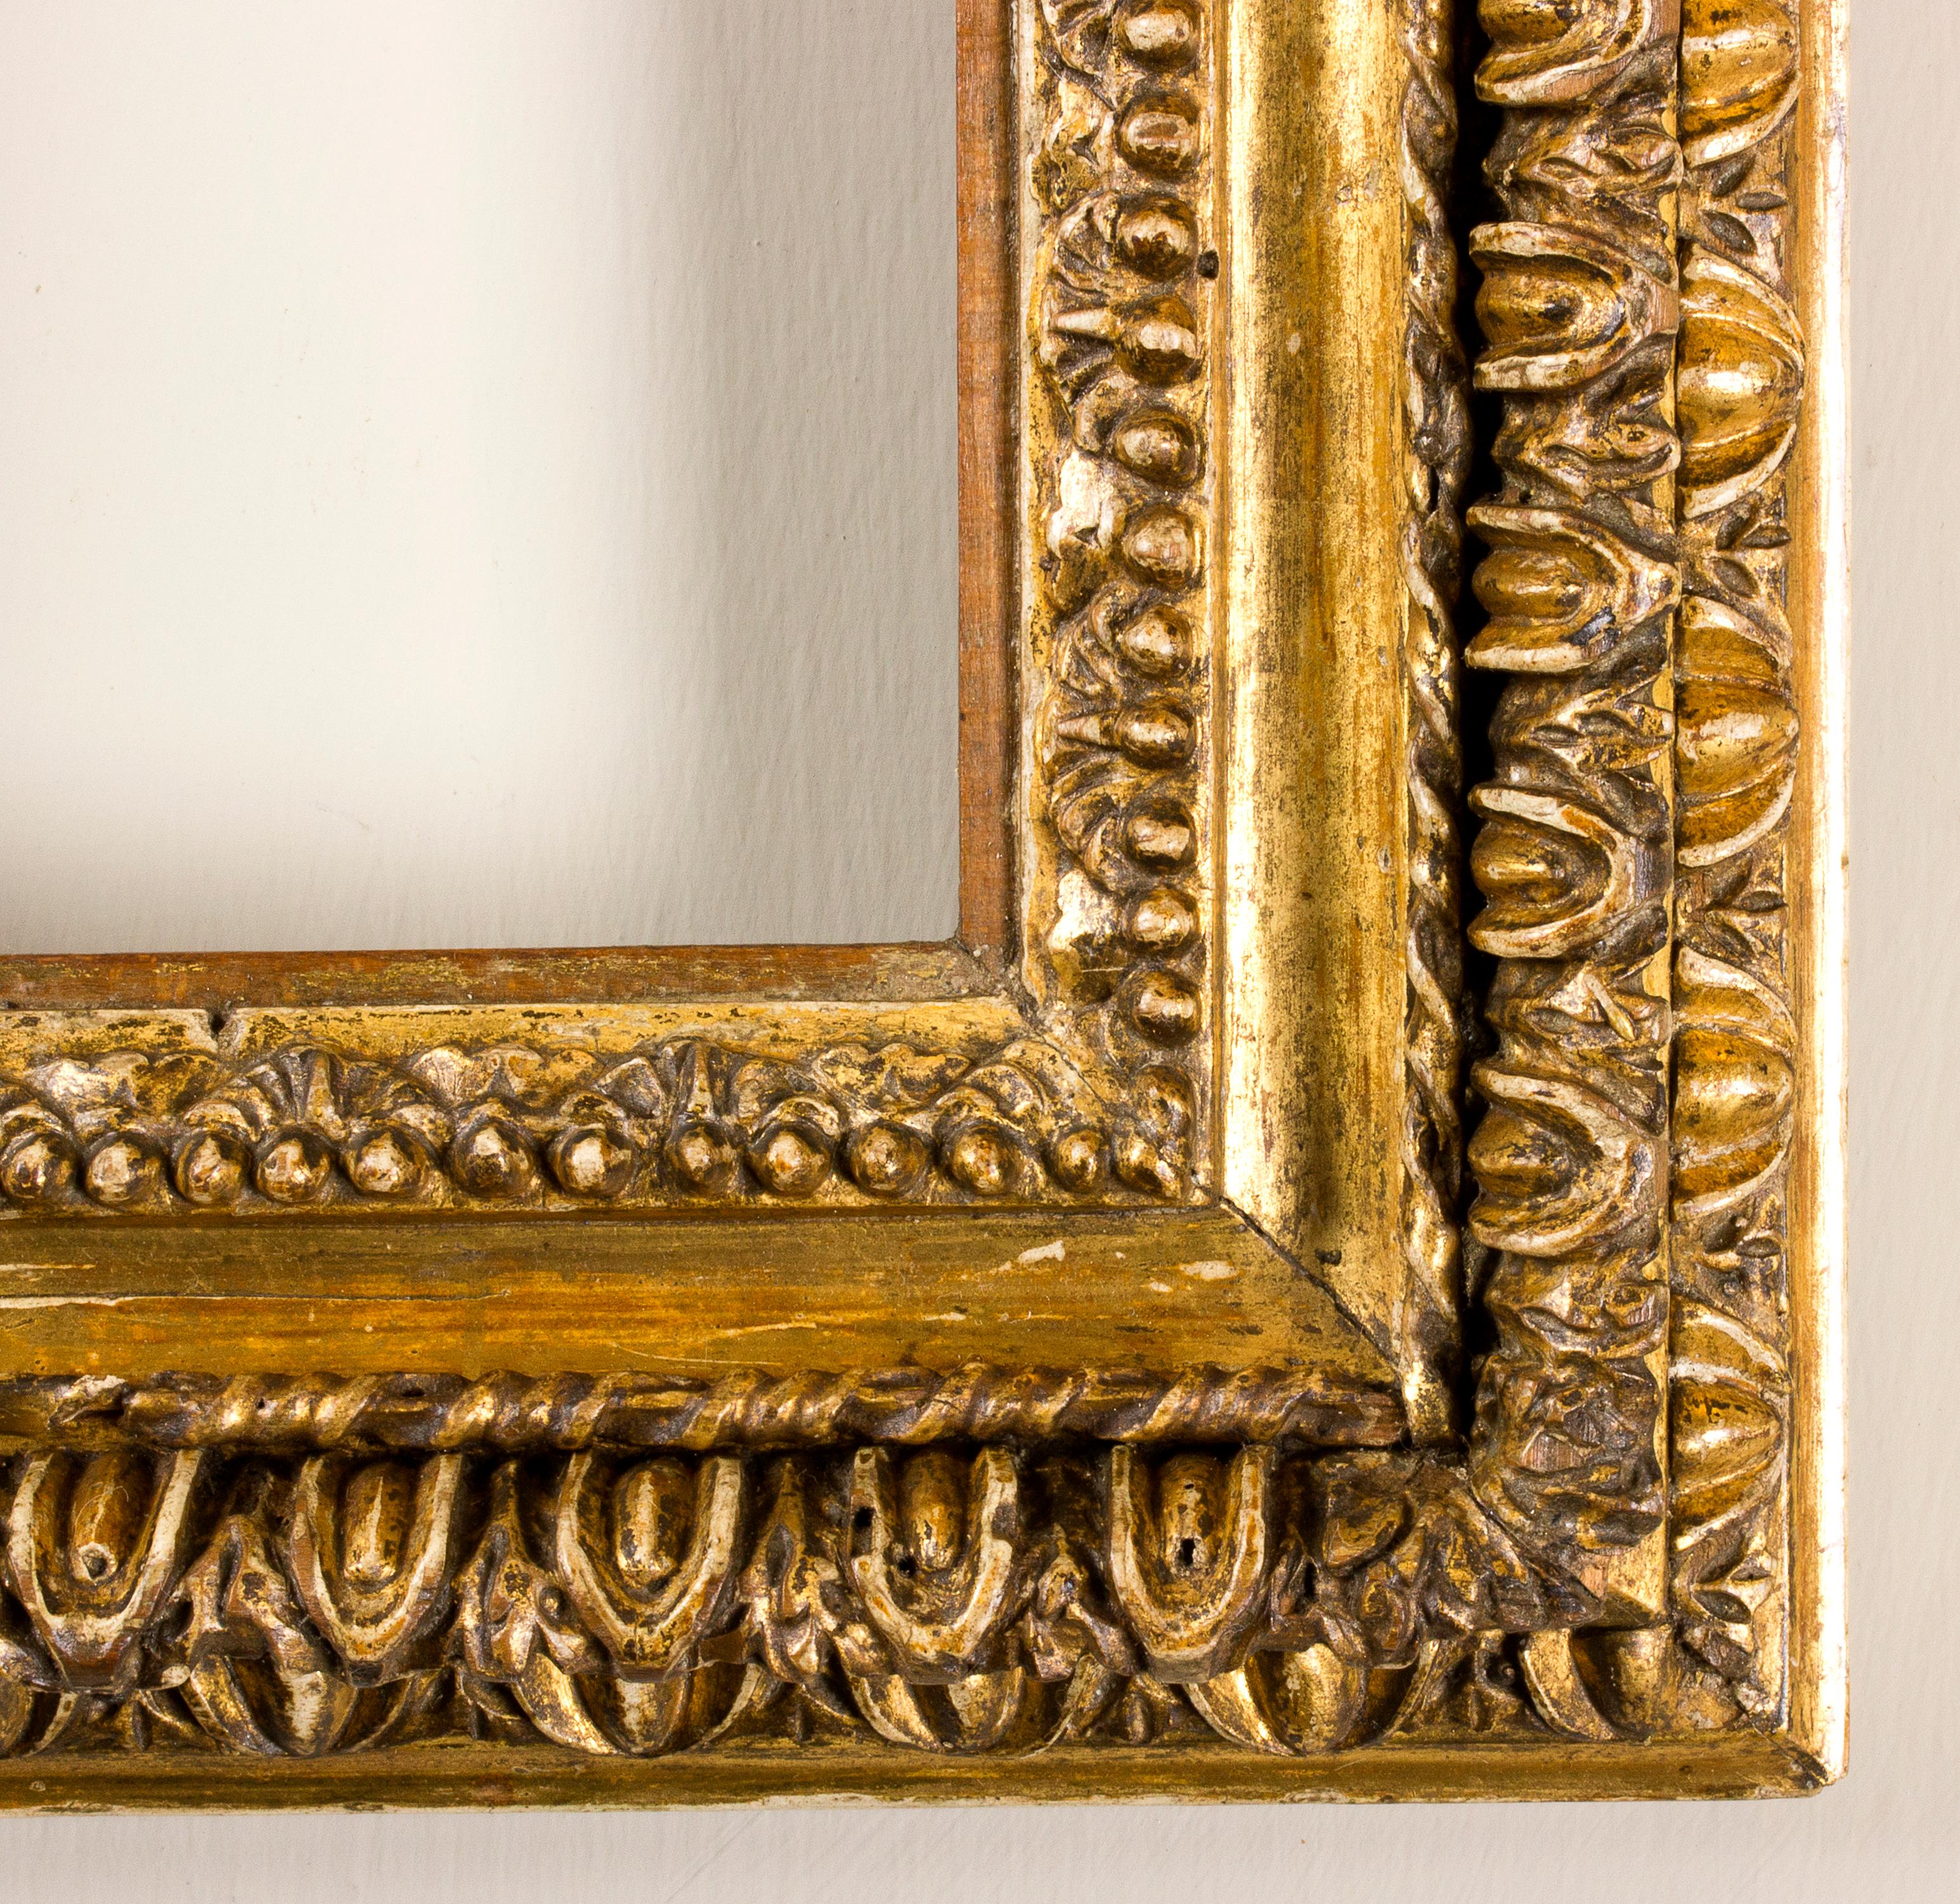 Roman frame, early 18th century
Golden wood frame with five orders of carving 
Measures: Inside: 20.1 x 15.6 cm; outside: 31 x 27.7 cm.
Depth is the wide of the band.
 